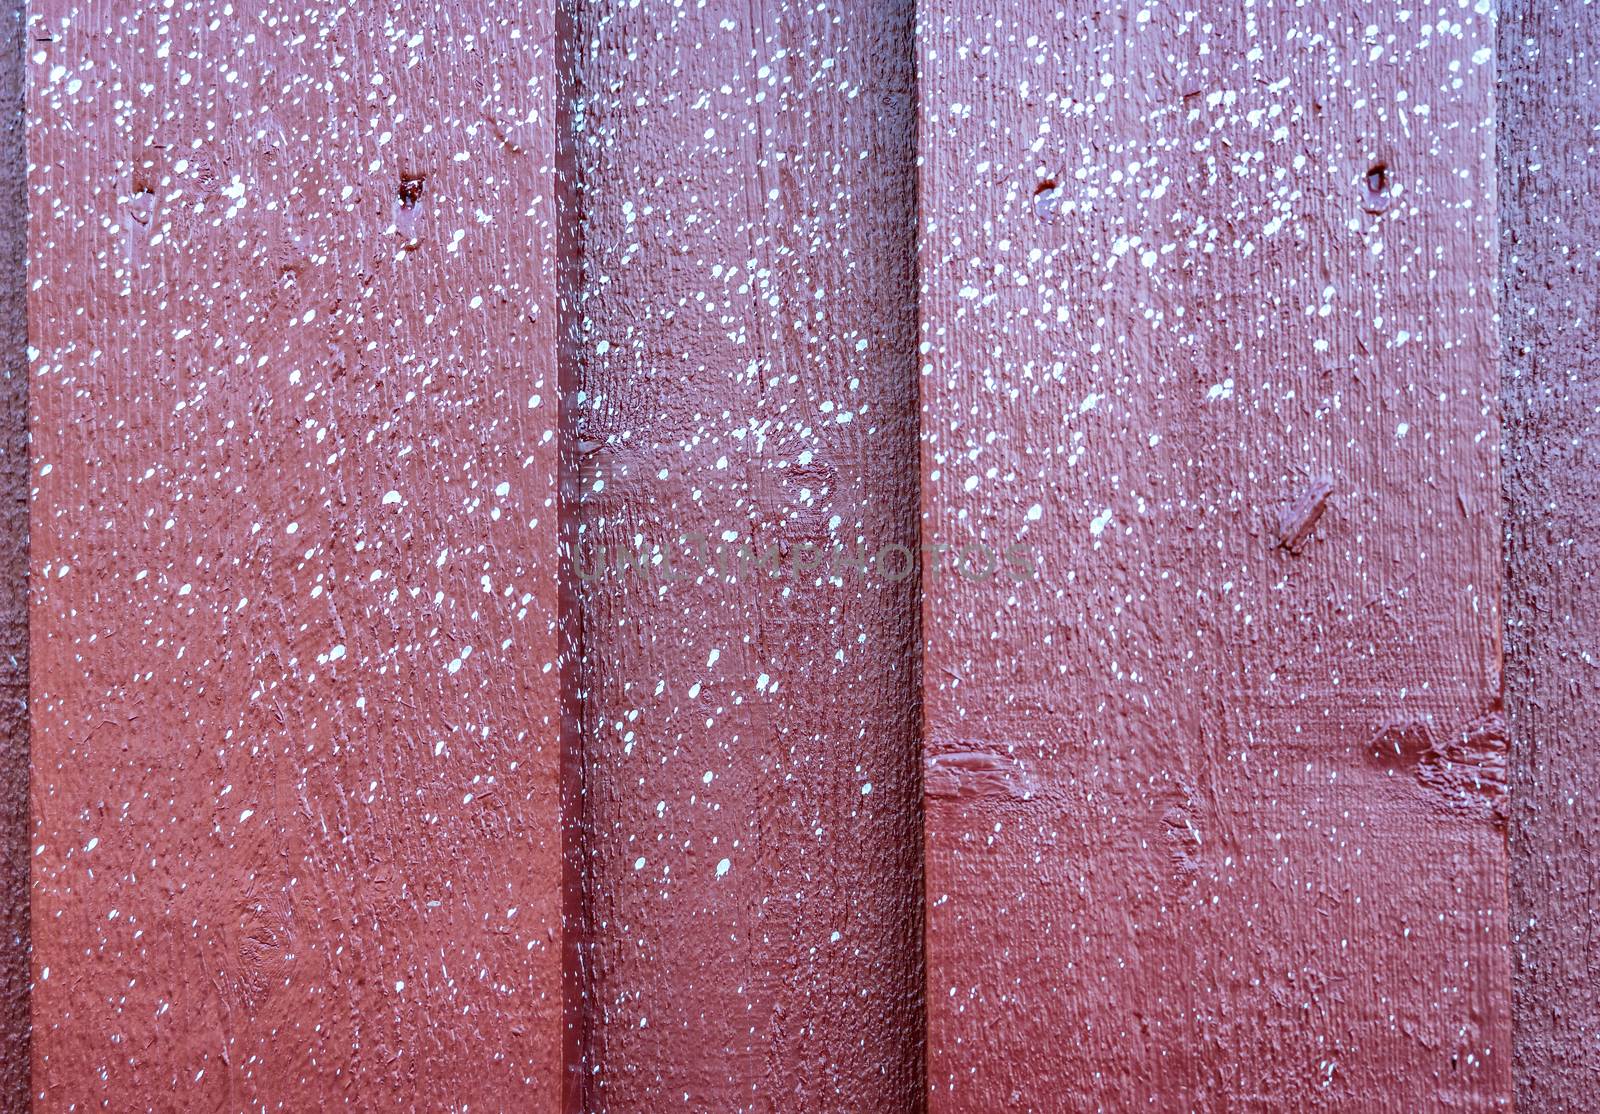 Close up view at multiple small white spots of white paint accidentally sprayed at red wooden wall.